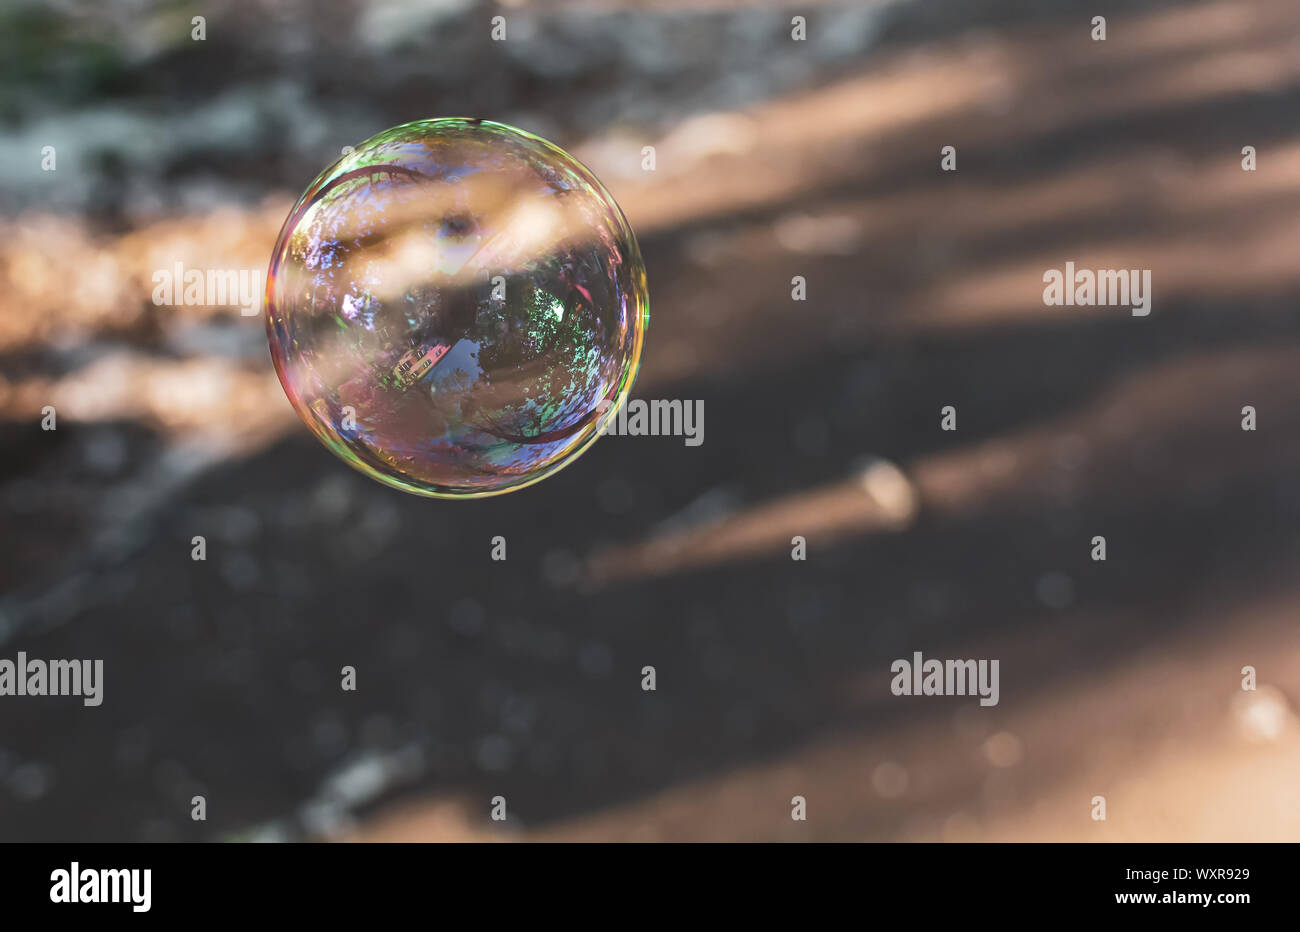 Coloured translucent soap bubble floating in the air with reflection of trees, sky and building on sunny evening. Calm background with soap bubble. Stock Photo